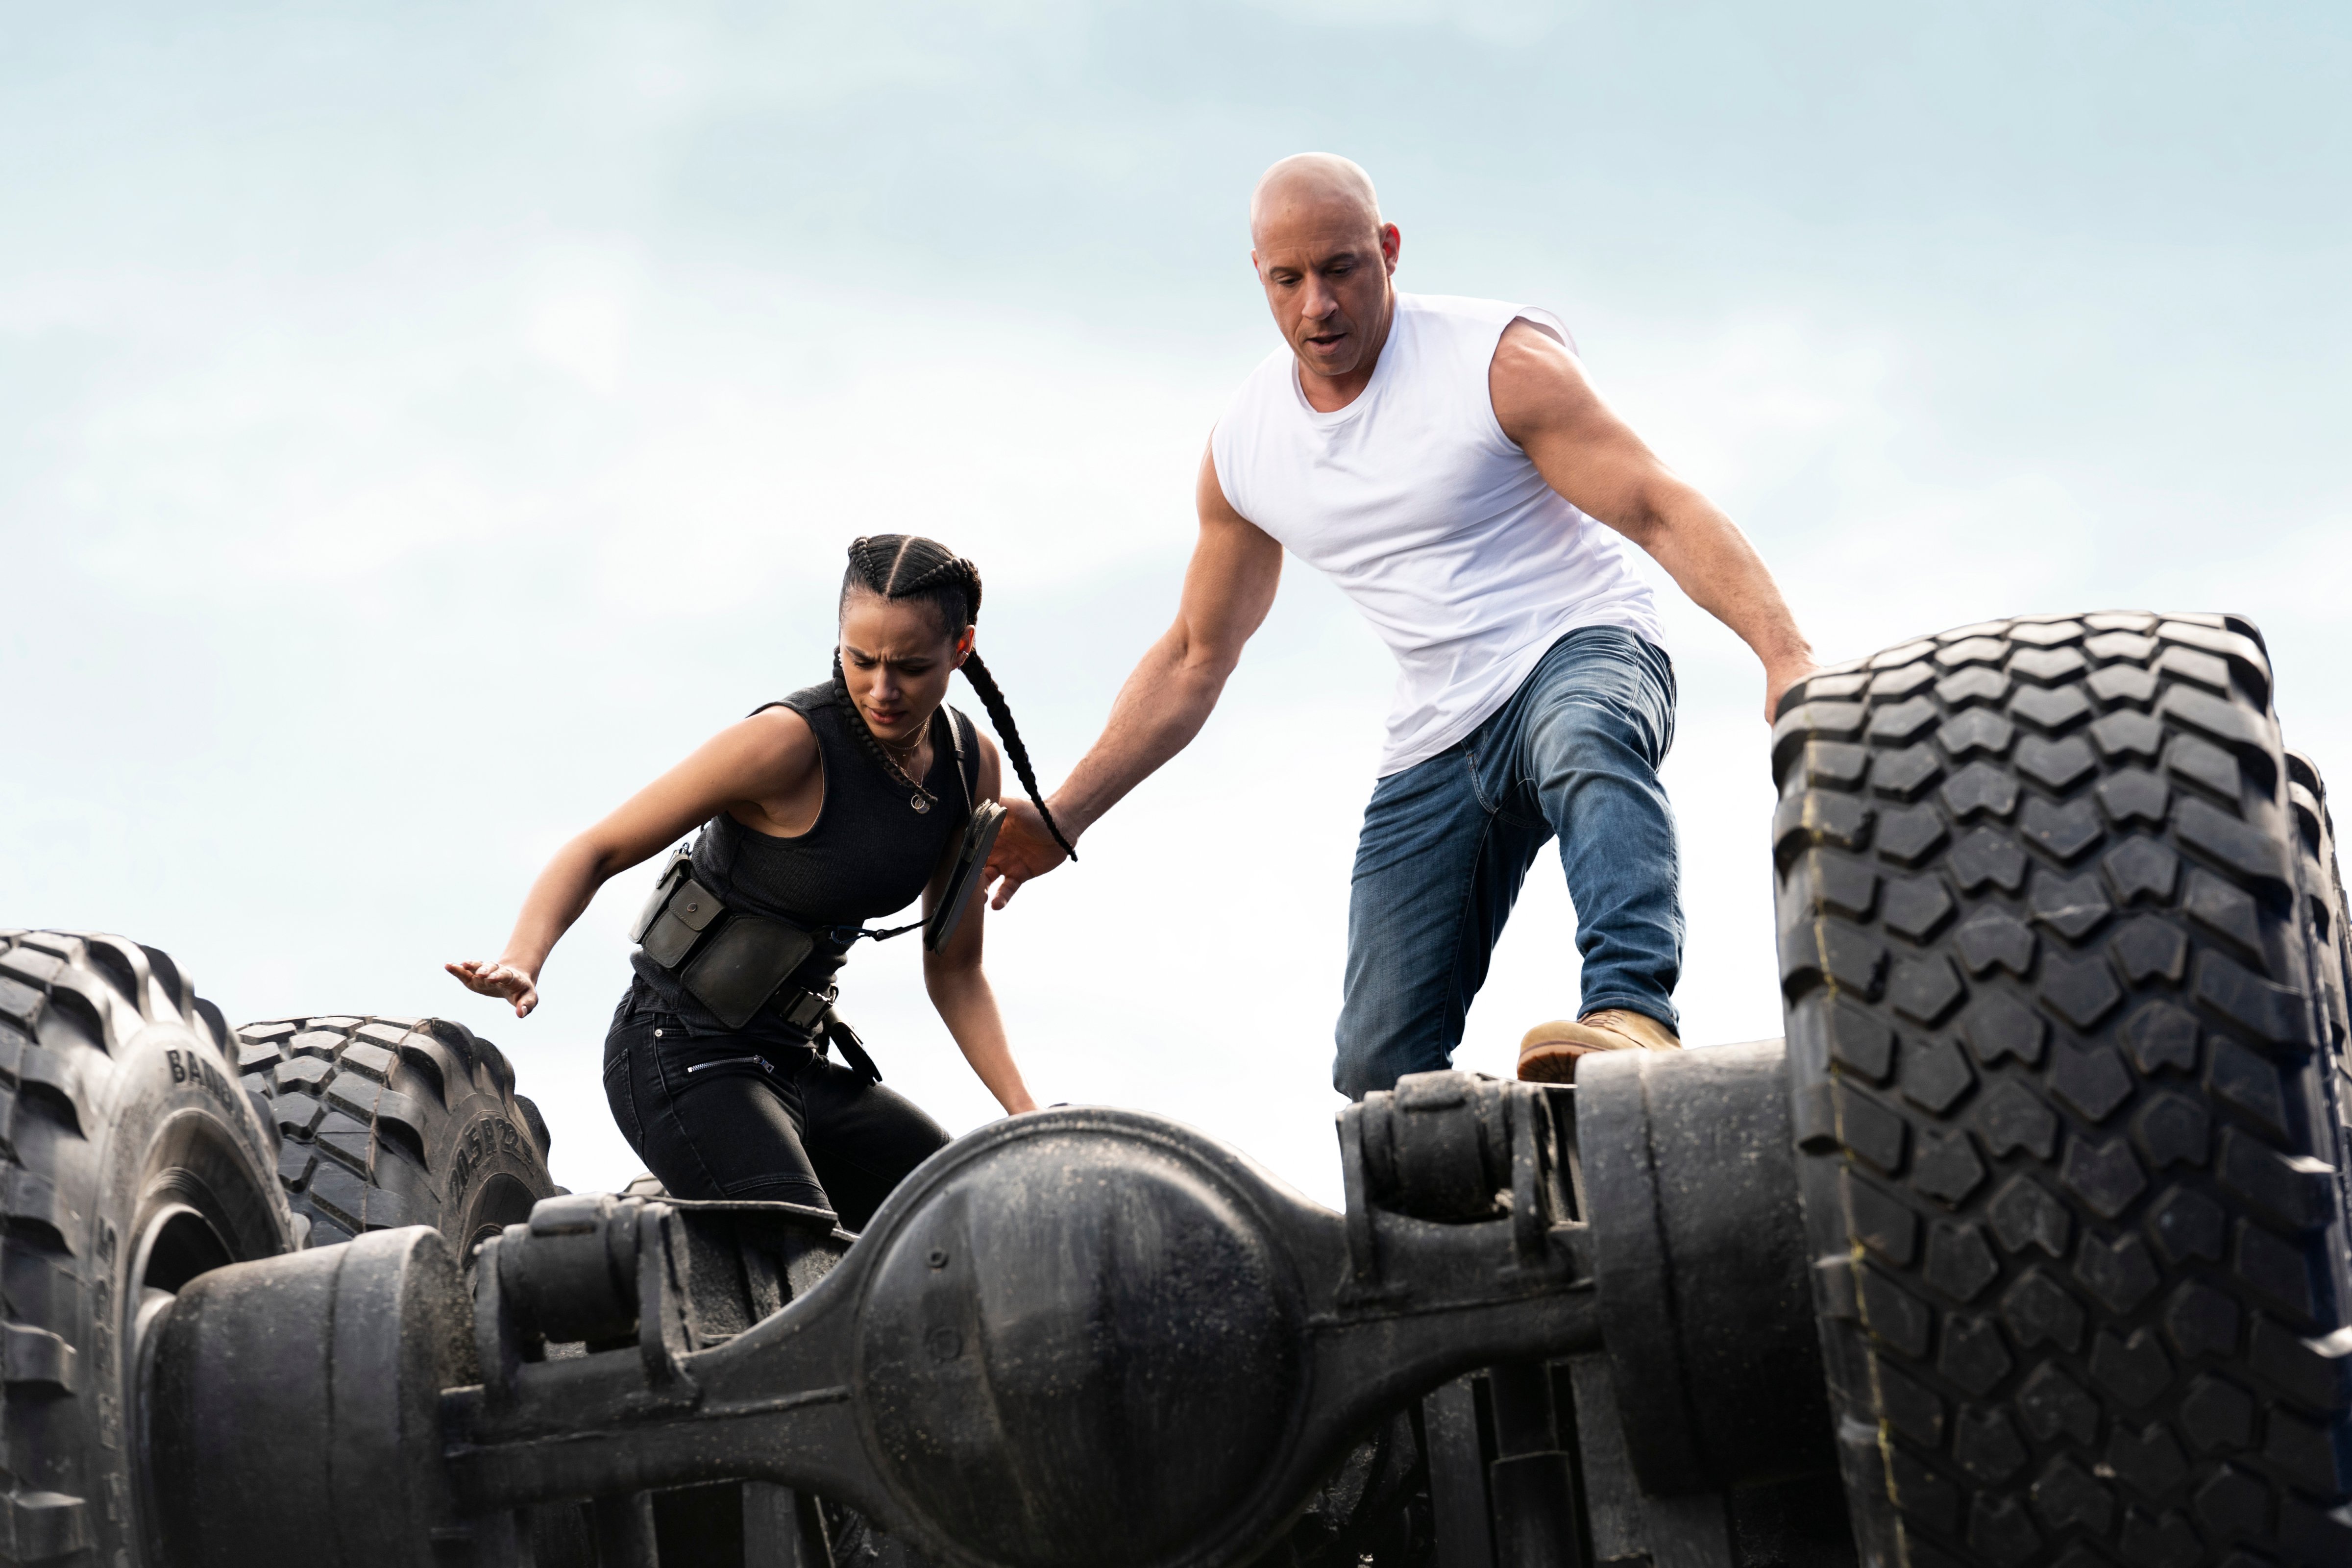 Nathalie Emmanuel and Vin Diesel in 'F9' (Photo Credit: Giles Keyte/Univer&mdash;© 2021 Universal Studios. All Rights Reserved.)